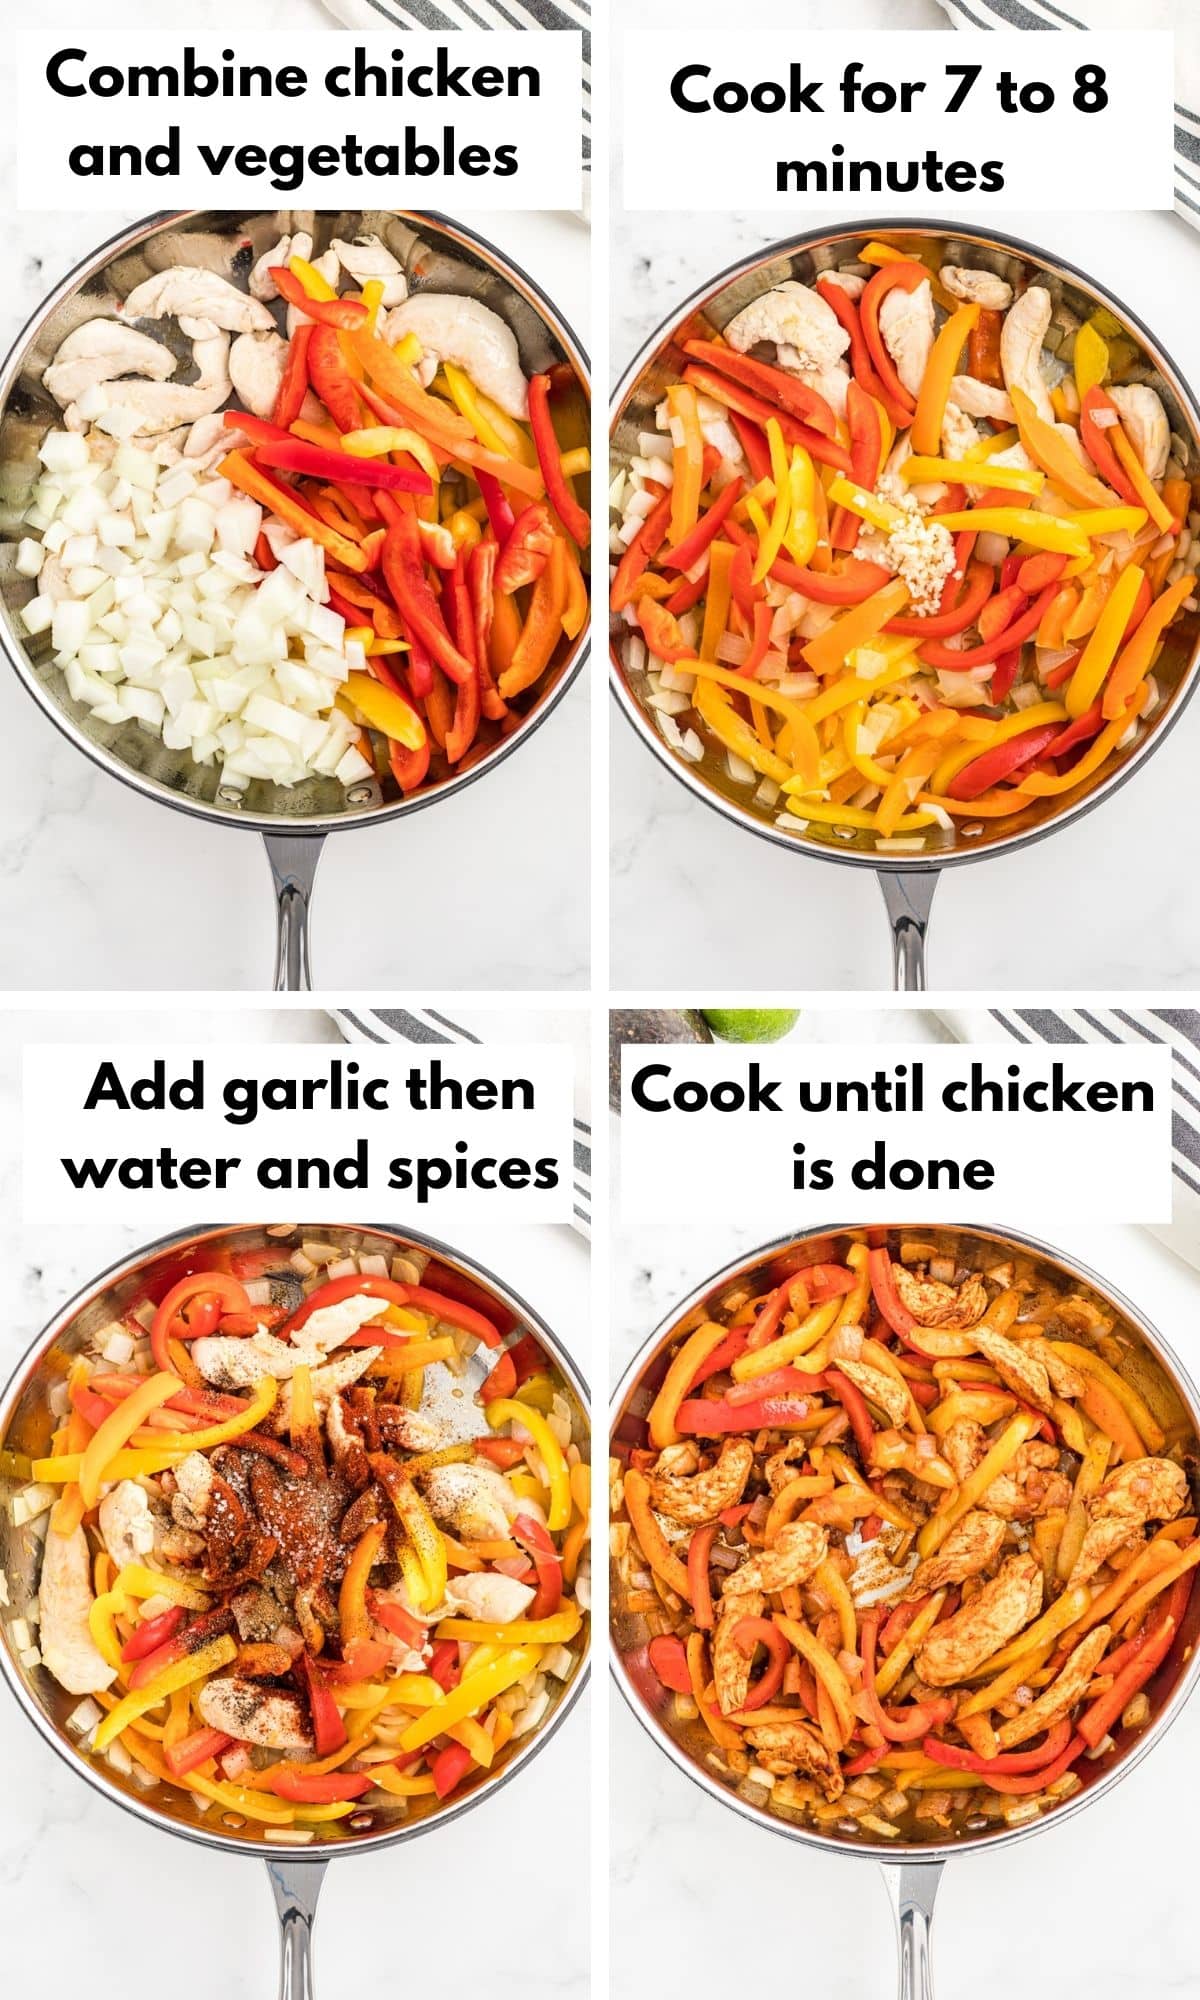 Pictures showing how to make the chicken fajitas